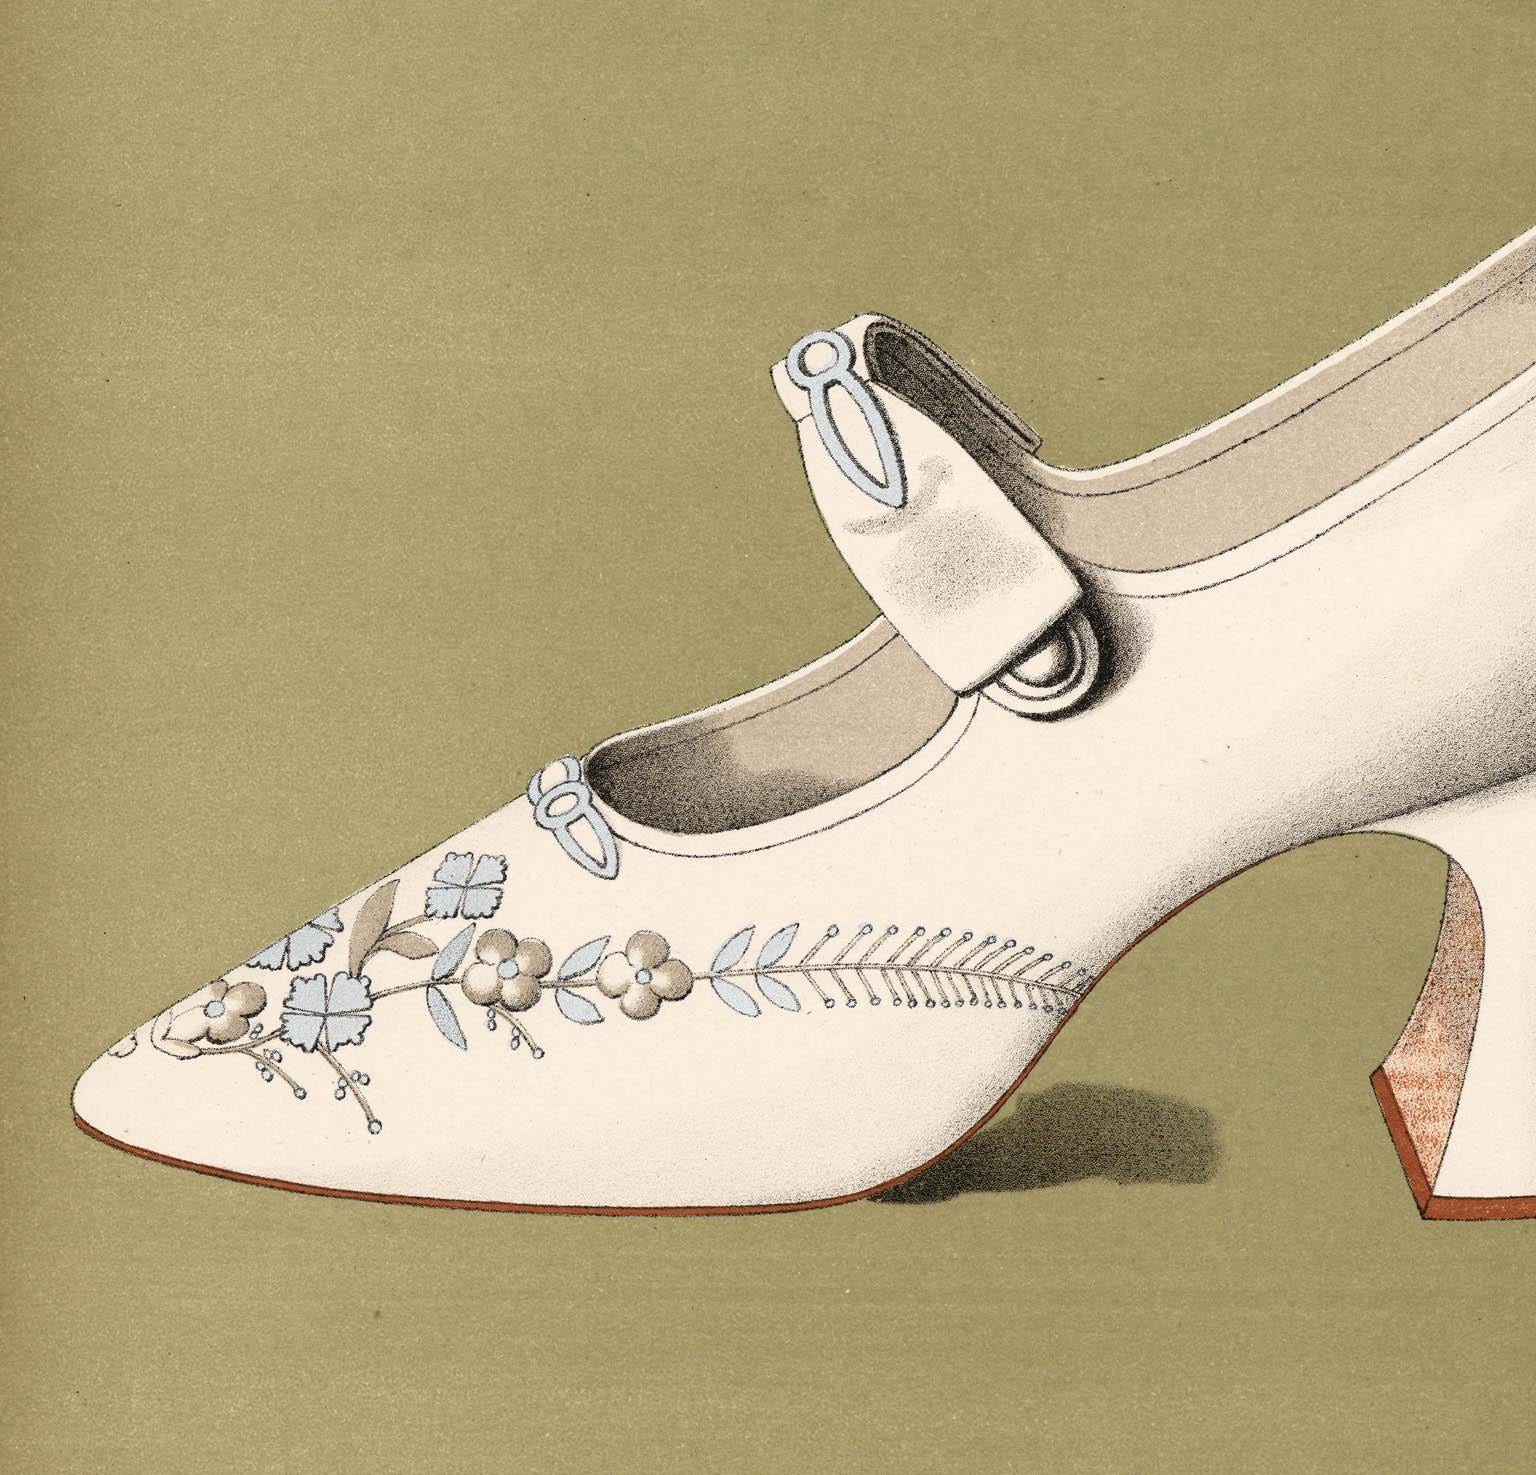 Ladies Dress Shoes.  Plate XII. - Print by T. Watson Greig